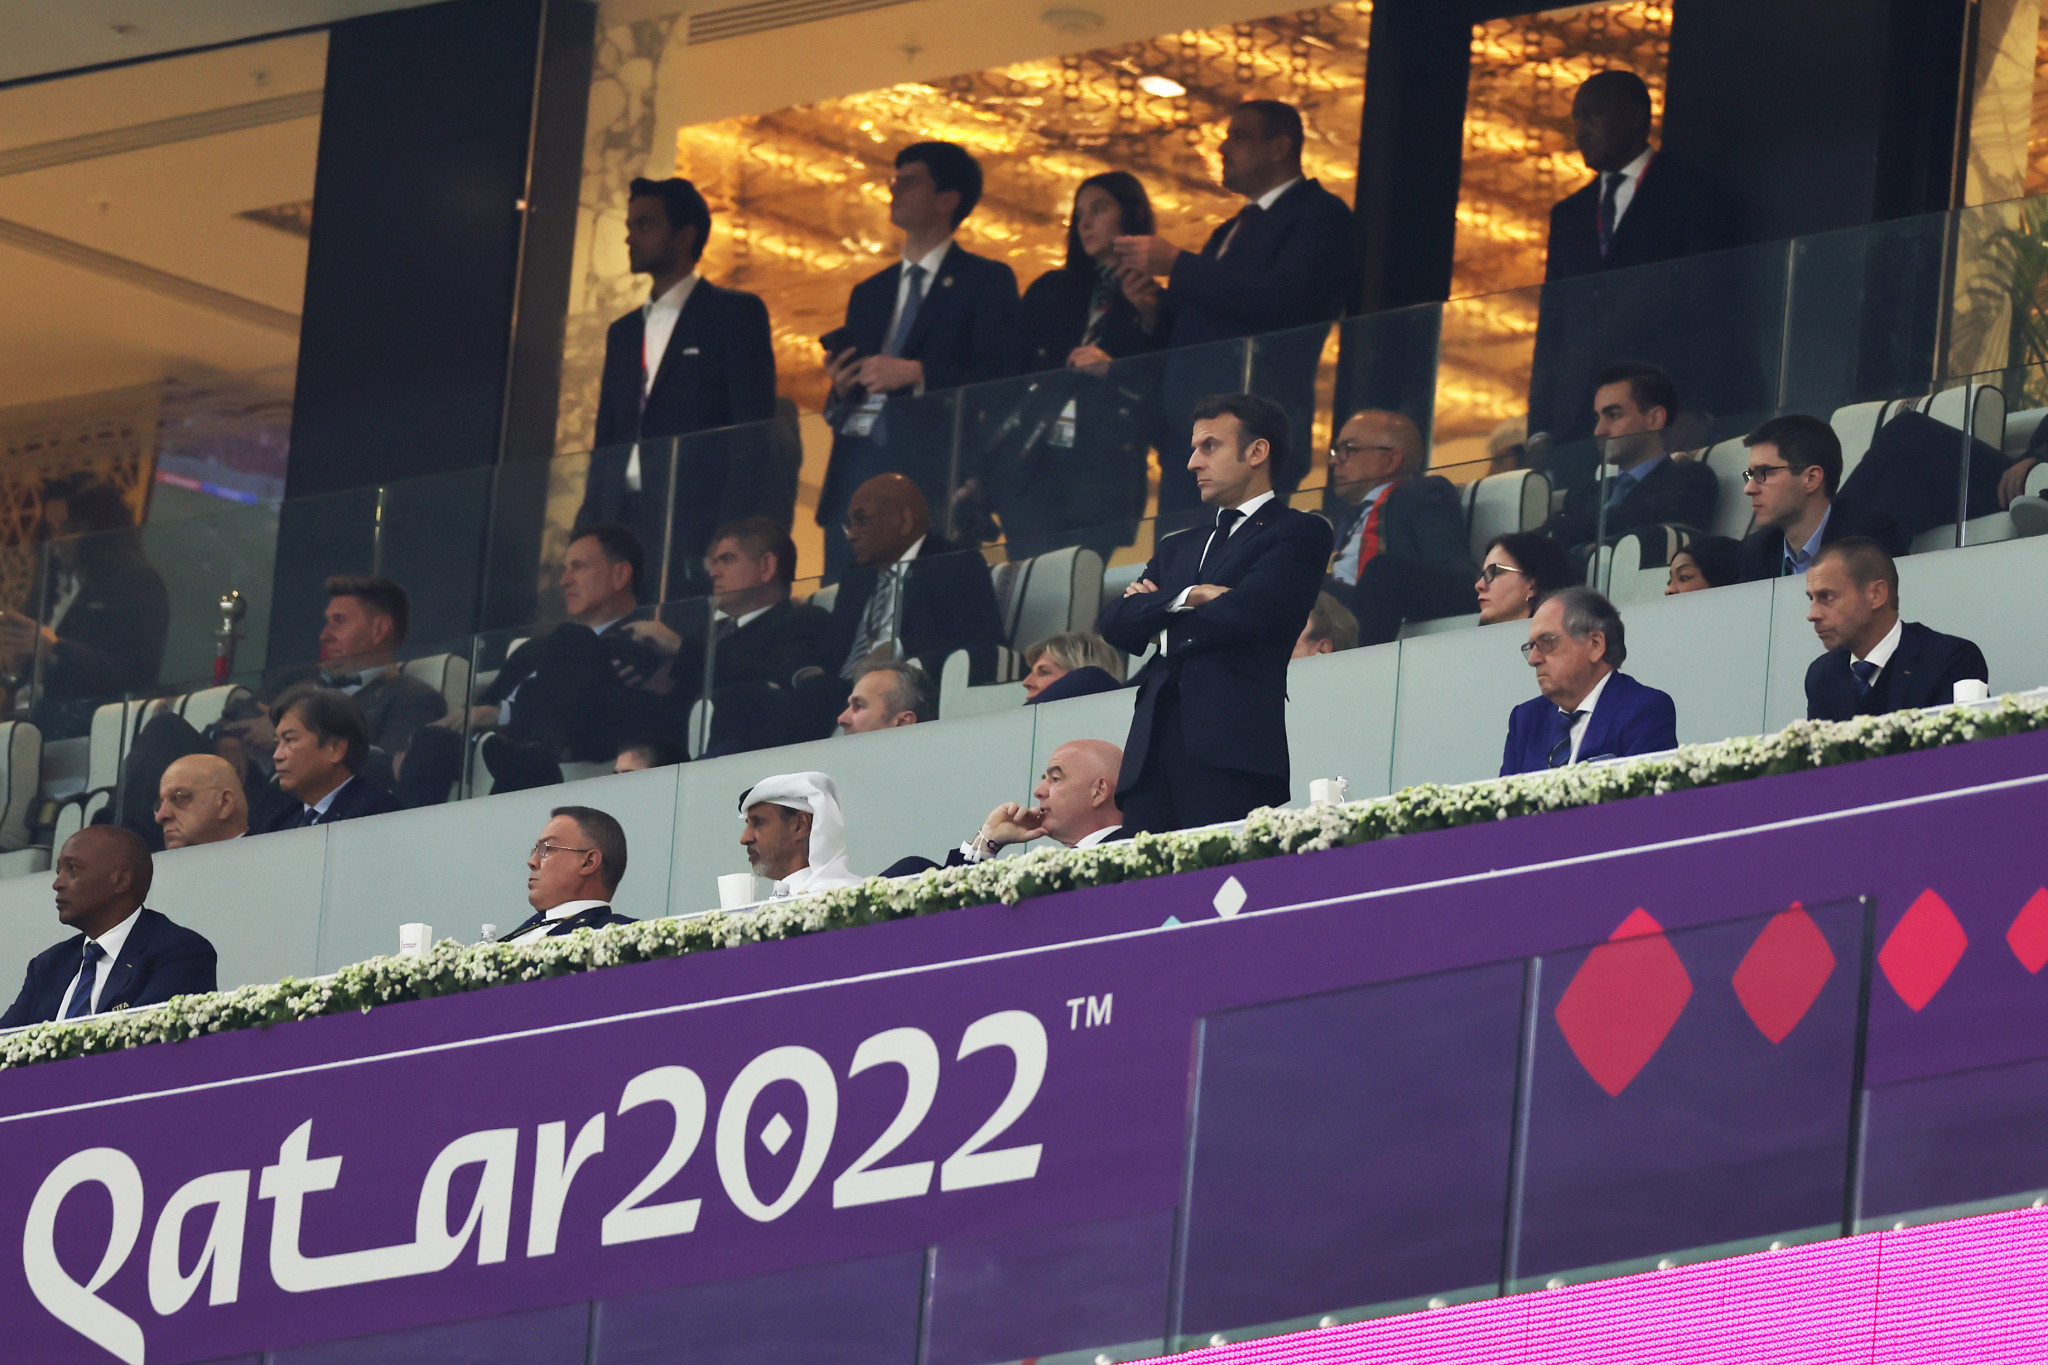 French President Emmanuel Macron was among the guests as France beat Morocco in their World Cup semi-final ©Getty Images